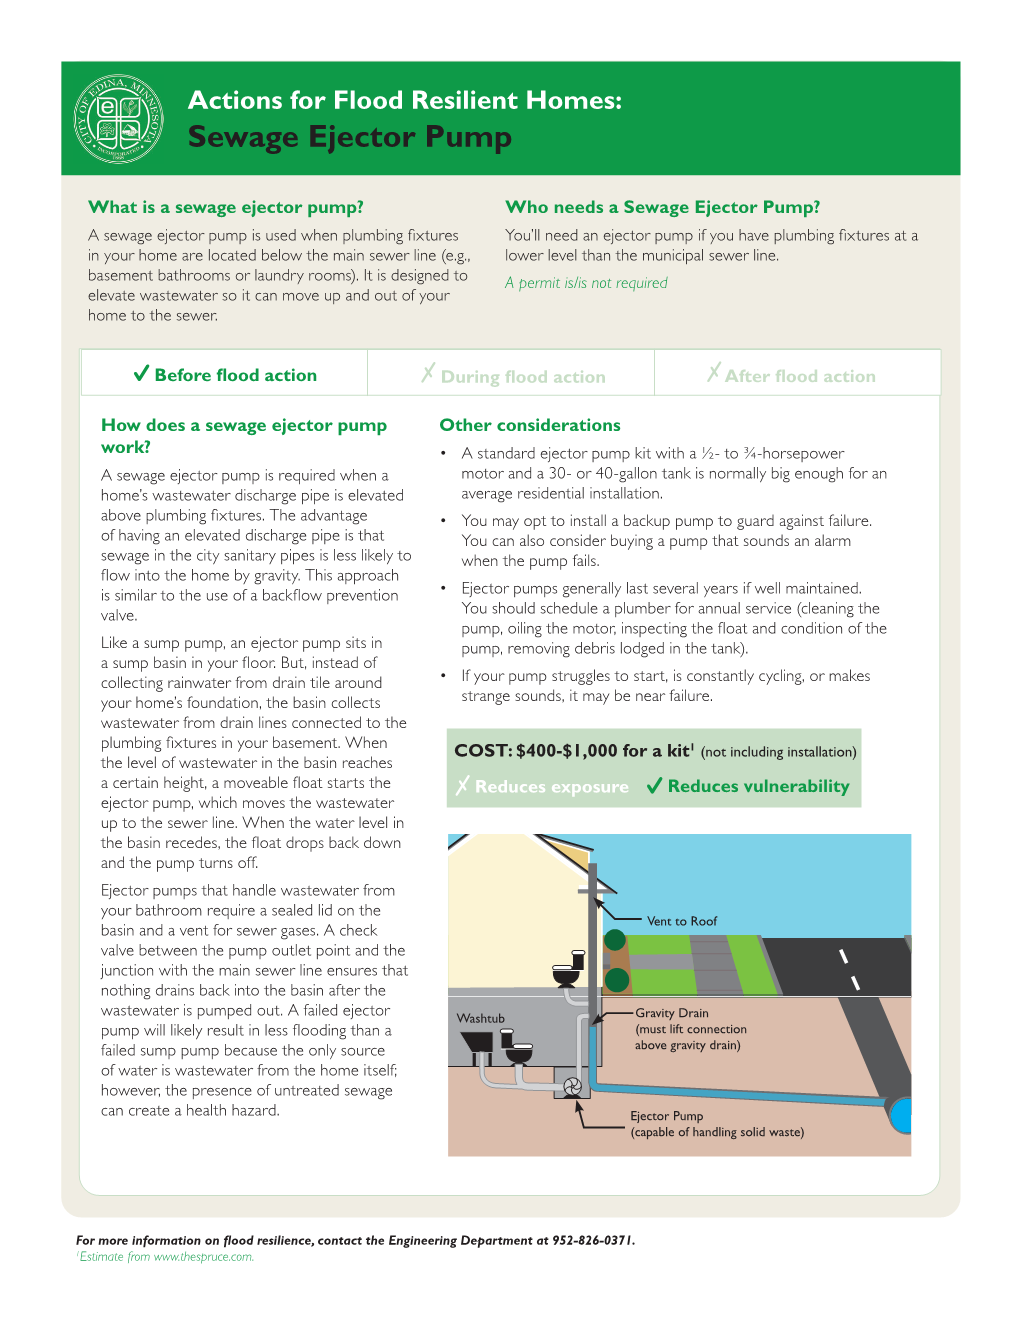 Actions for Flood Resilient Homes: Sewage Ejector Pump